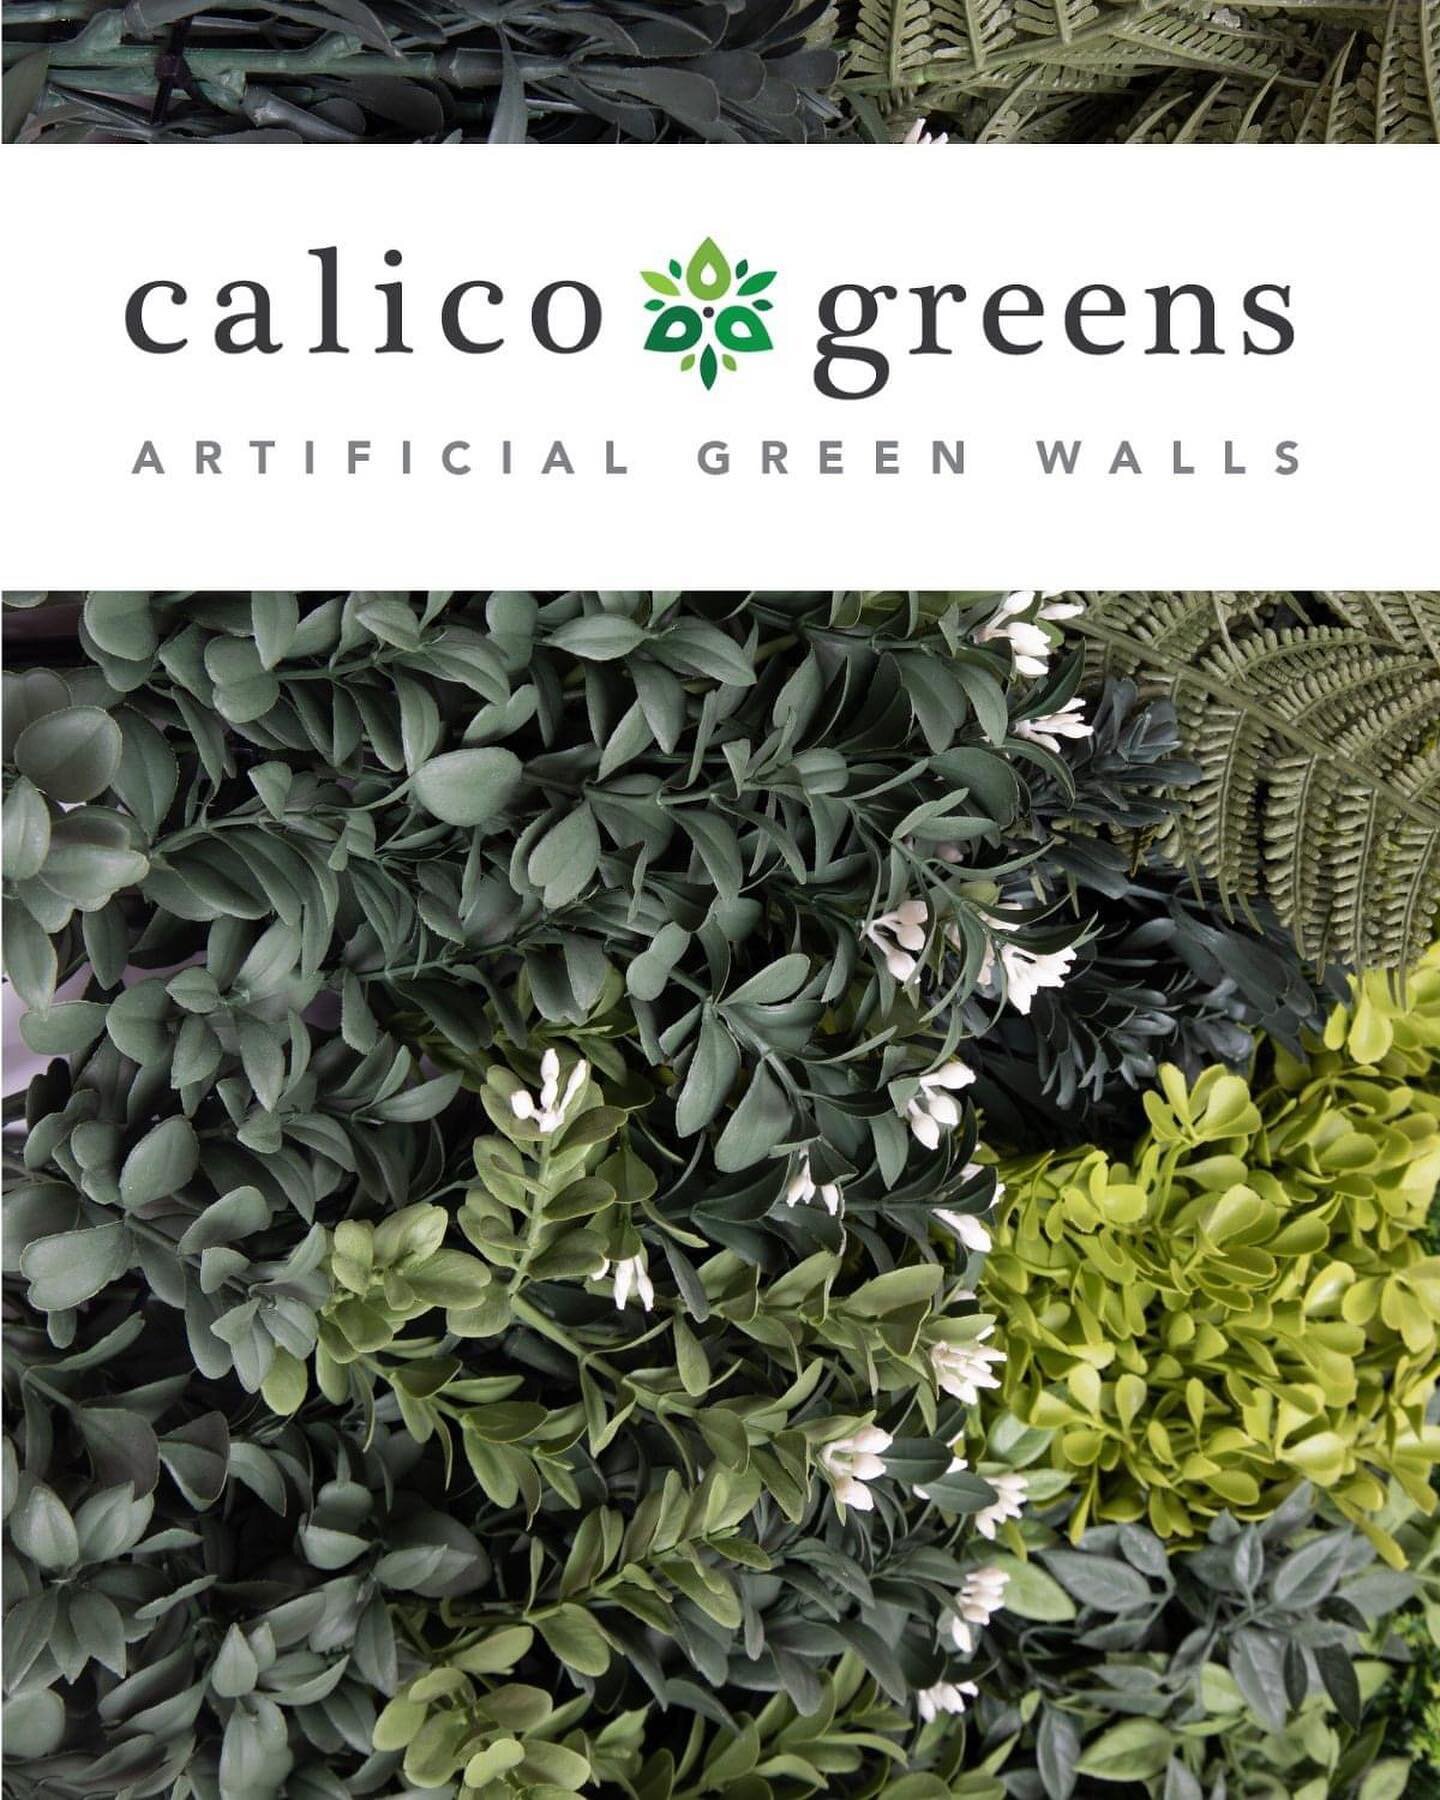 We&rsquo;re also doing artificial green walls, call us today for a free consultation 💐593-1864 #artificialgreenwall 
#SYNlawnOahu #Hawaiilandscaping #SyntheticTurf #ArtificialGrass #SynLawn #lifetimewarranty #biobasedproducts #savewater #savetime #g